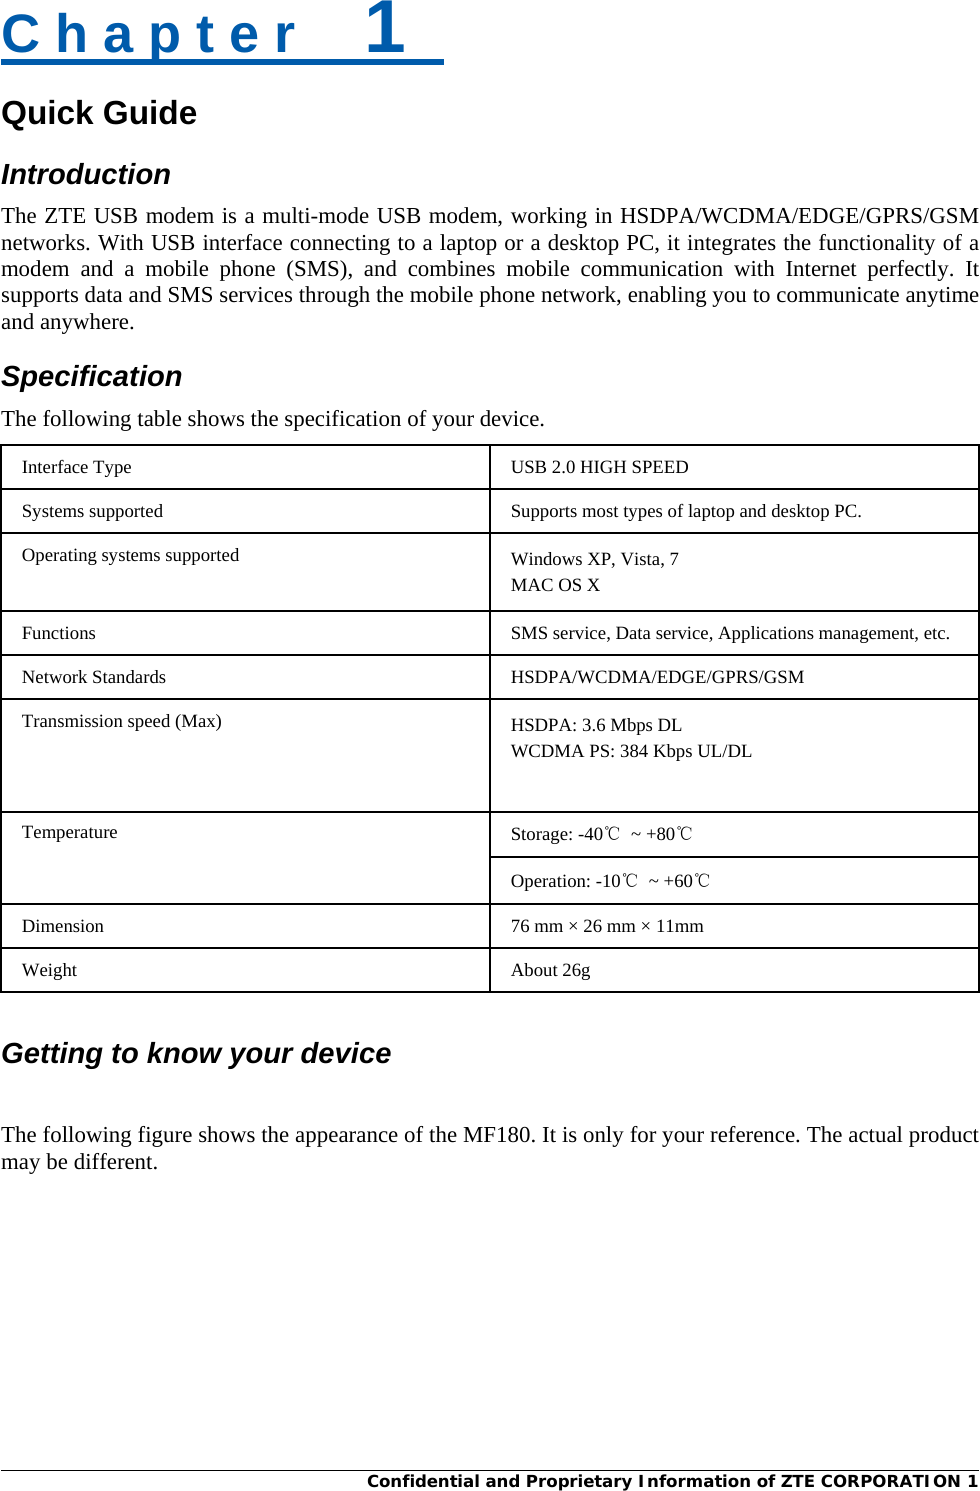  Confidential and Proprietary Information of ZTE CORPORATION 1   Quick Guide C h a p t e r    1   Introduction The ZTE USB modem is a multi-mode USB modem, working in HSDPA/WCDMA/EDGE/GPRS/GSM networks. With USB interface connecting to a laptop or a desktop PC, it integrates the functionality of a modem and a mobile phone (SMS), and combines mobile communication with Internet perfectly. It supports data and SMS services through the mobile phone network, enabling you to communicate anytime and anywhere. Specification The following table shows the specification of your device. Interface Type USB 2.0 HIGH SPEED Systems supported Supports most types of laptop and desktop PC. Operating systems supported Windows XP, Vista, 7 MAC OS X Functions SMS service, Data service, Applications management, etc. Network Standards HSDPA/WCDMA/EDGE/GPRS/GSM Transmission speed (Max) HSDPA: 3.6 Mbps DL WCDMA PS: 384 Kbps UL/DL Temperature Storage: -40℃ ~ +80℃ Operation: -10℃ ~ +60℃ Dimension  76 mm × 26 mm × 11mm Weight About 26g   Getting to know your device  The following figure shows the appearance of the MF180. It is only for your reference. The actual product may be different. 